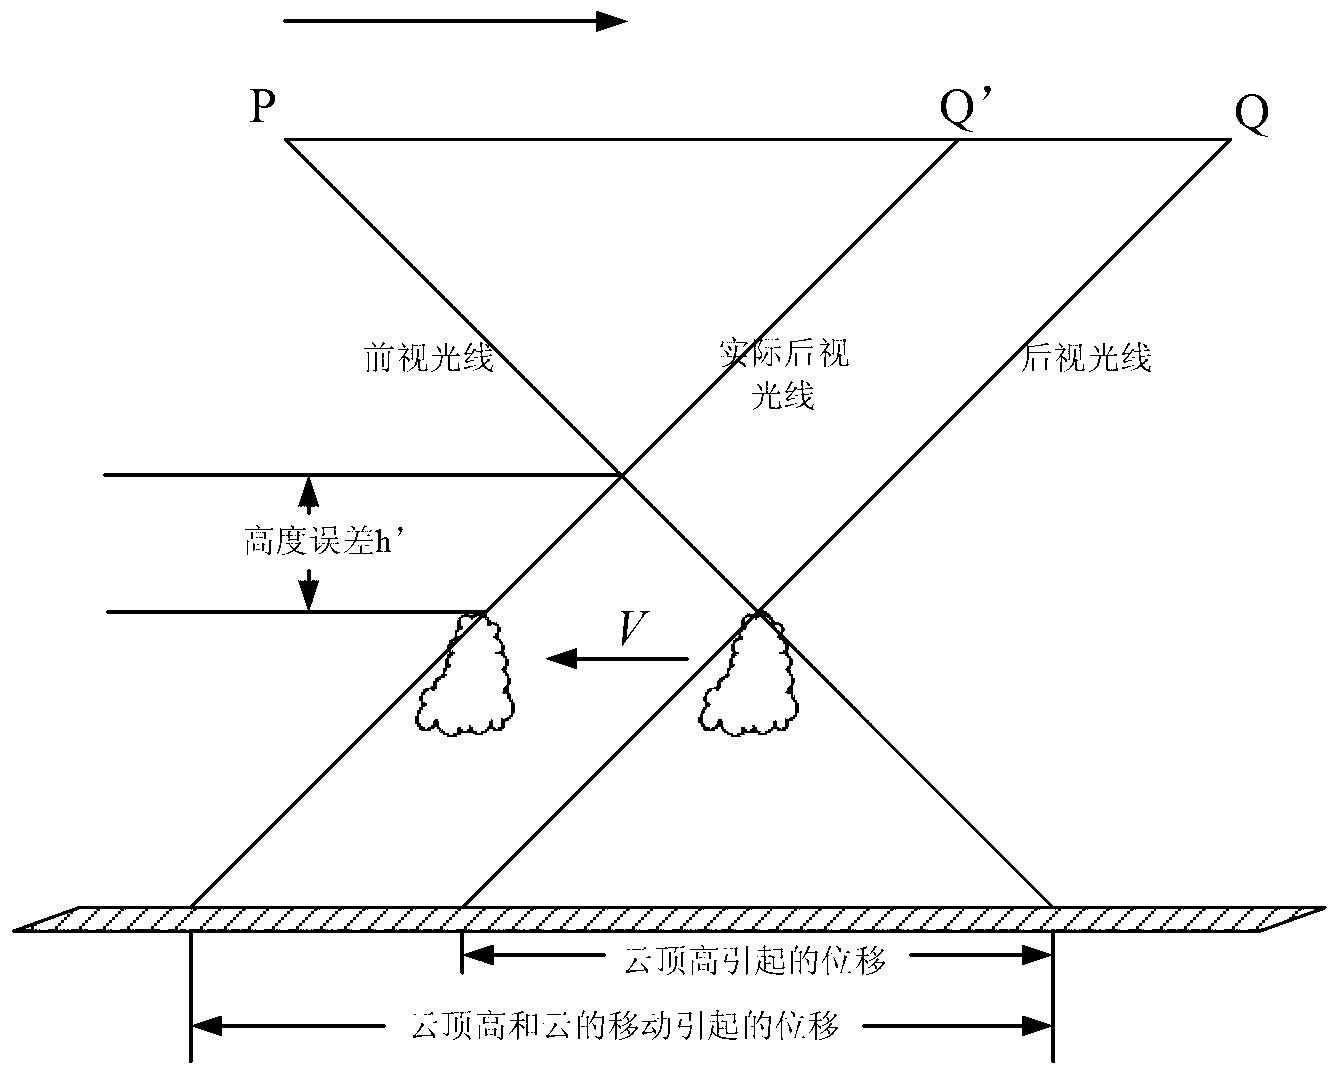 Cloud top height retrieval method based on satellite tri-linear array CCD (charge coupled device) image